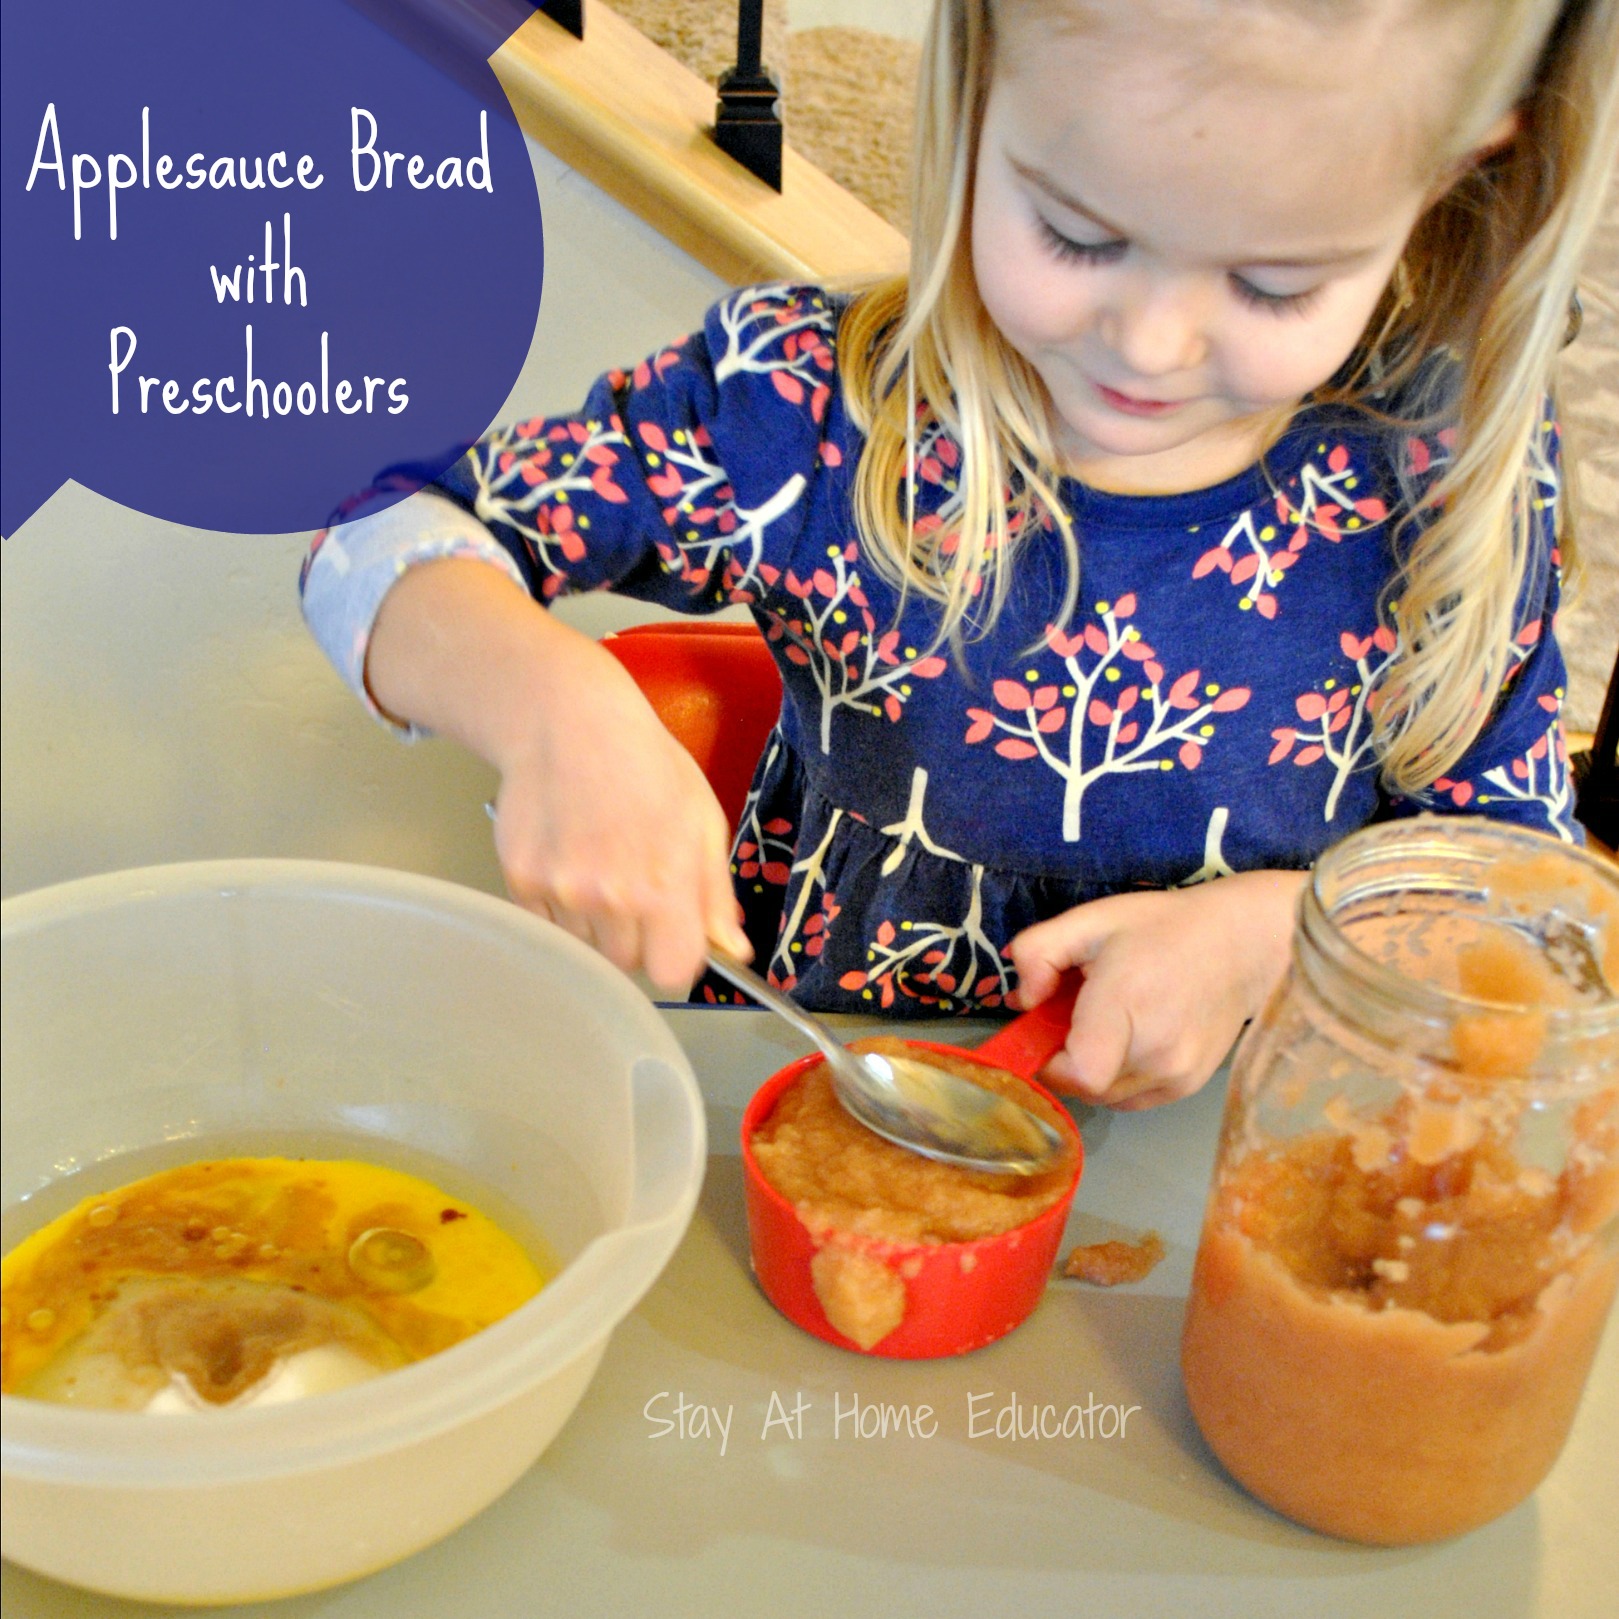 make applesauce bread with preschoolers - Stay At Home Educator